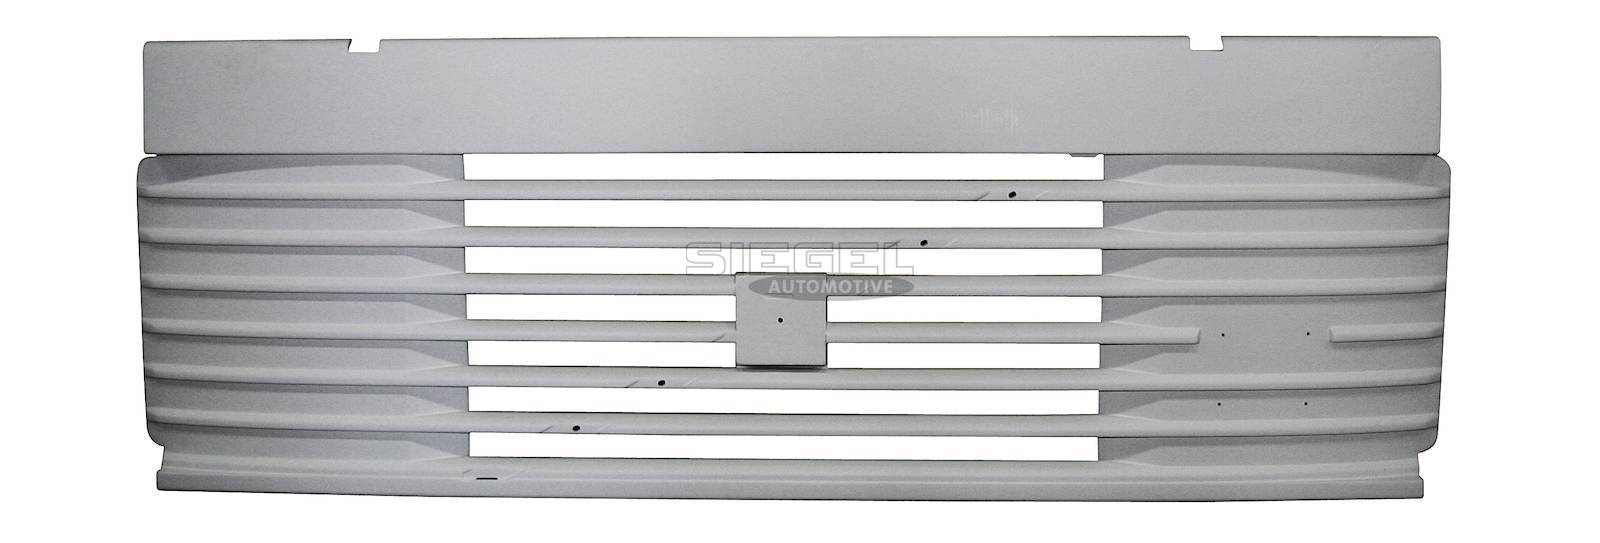 Volvo Front Grille Panel - F 10 1987-1995, F 12 1987-1995, F 16